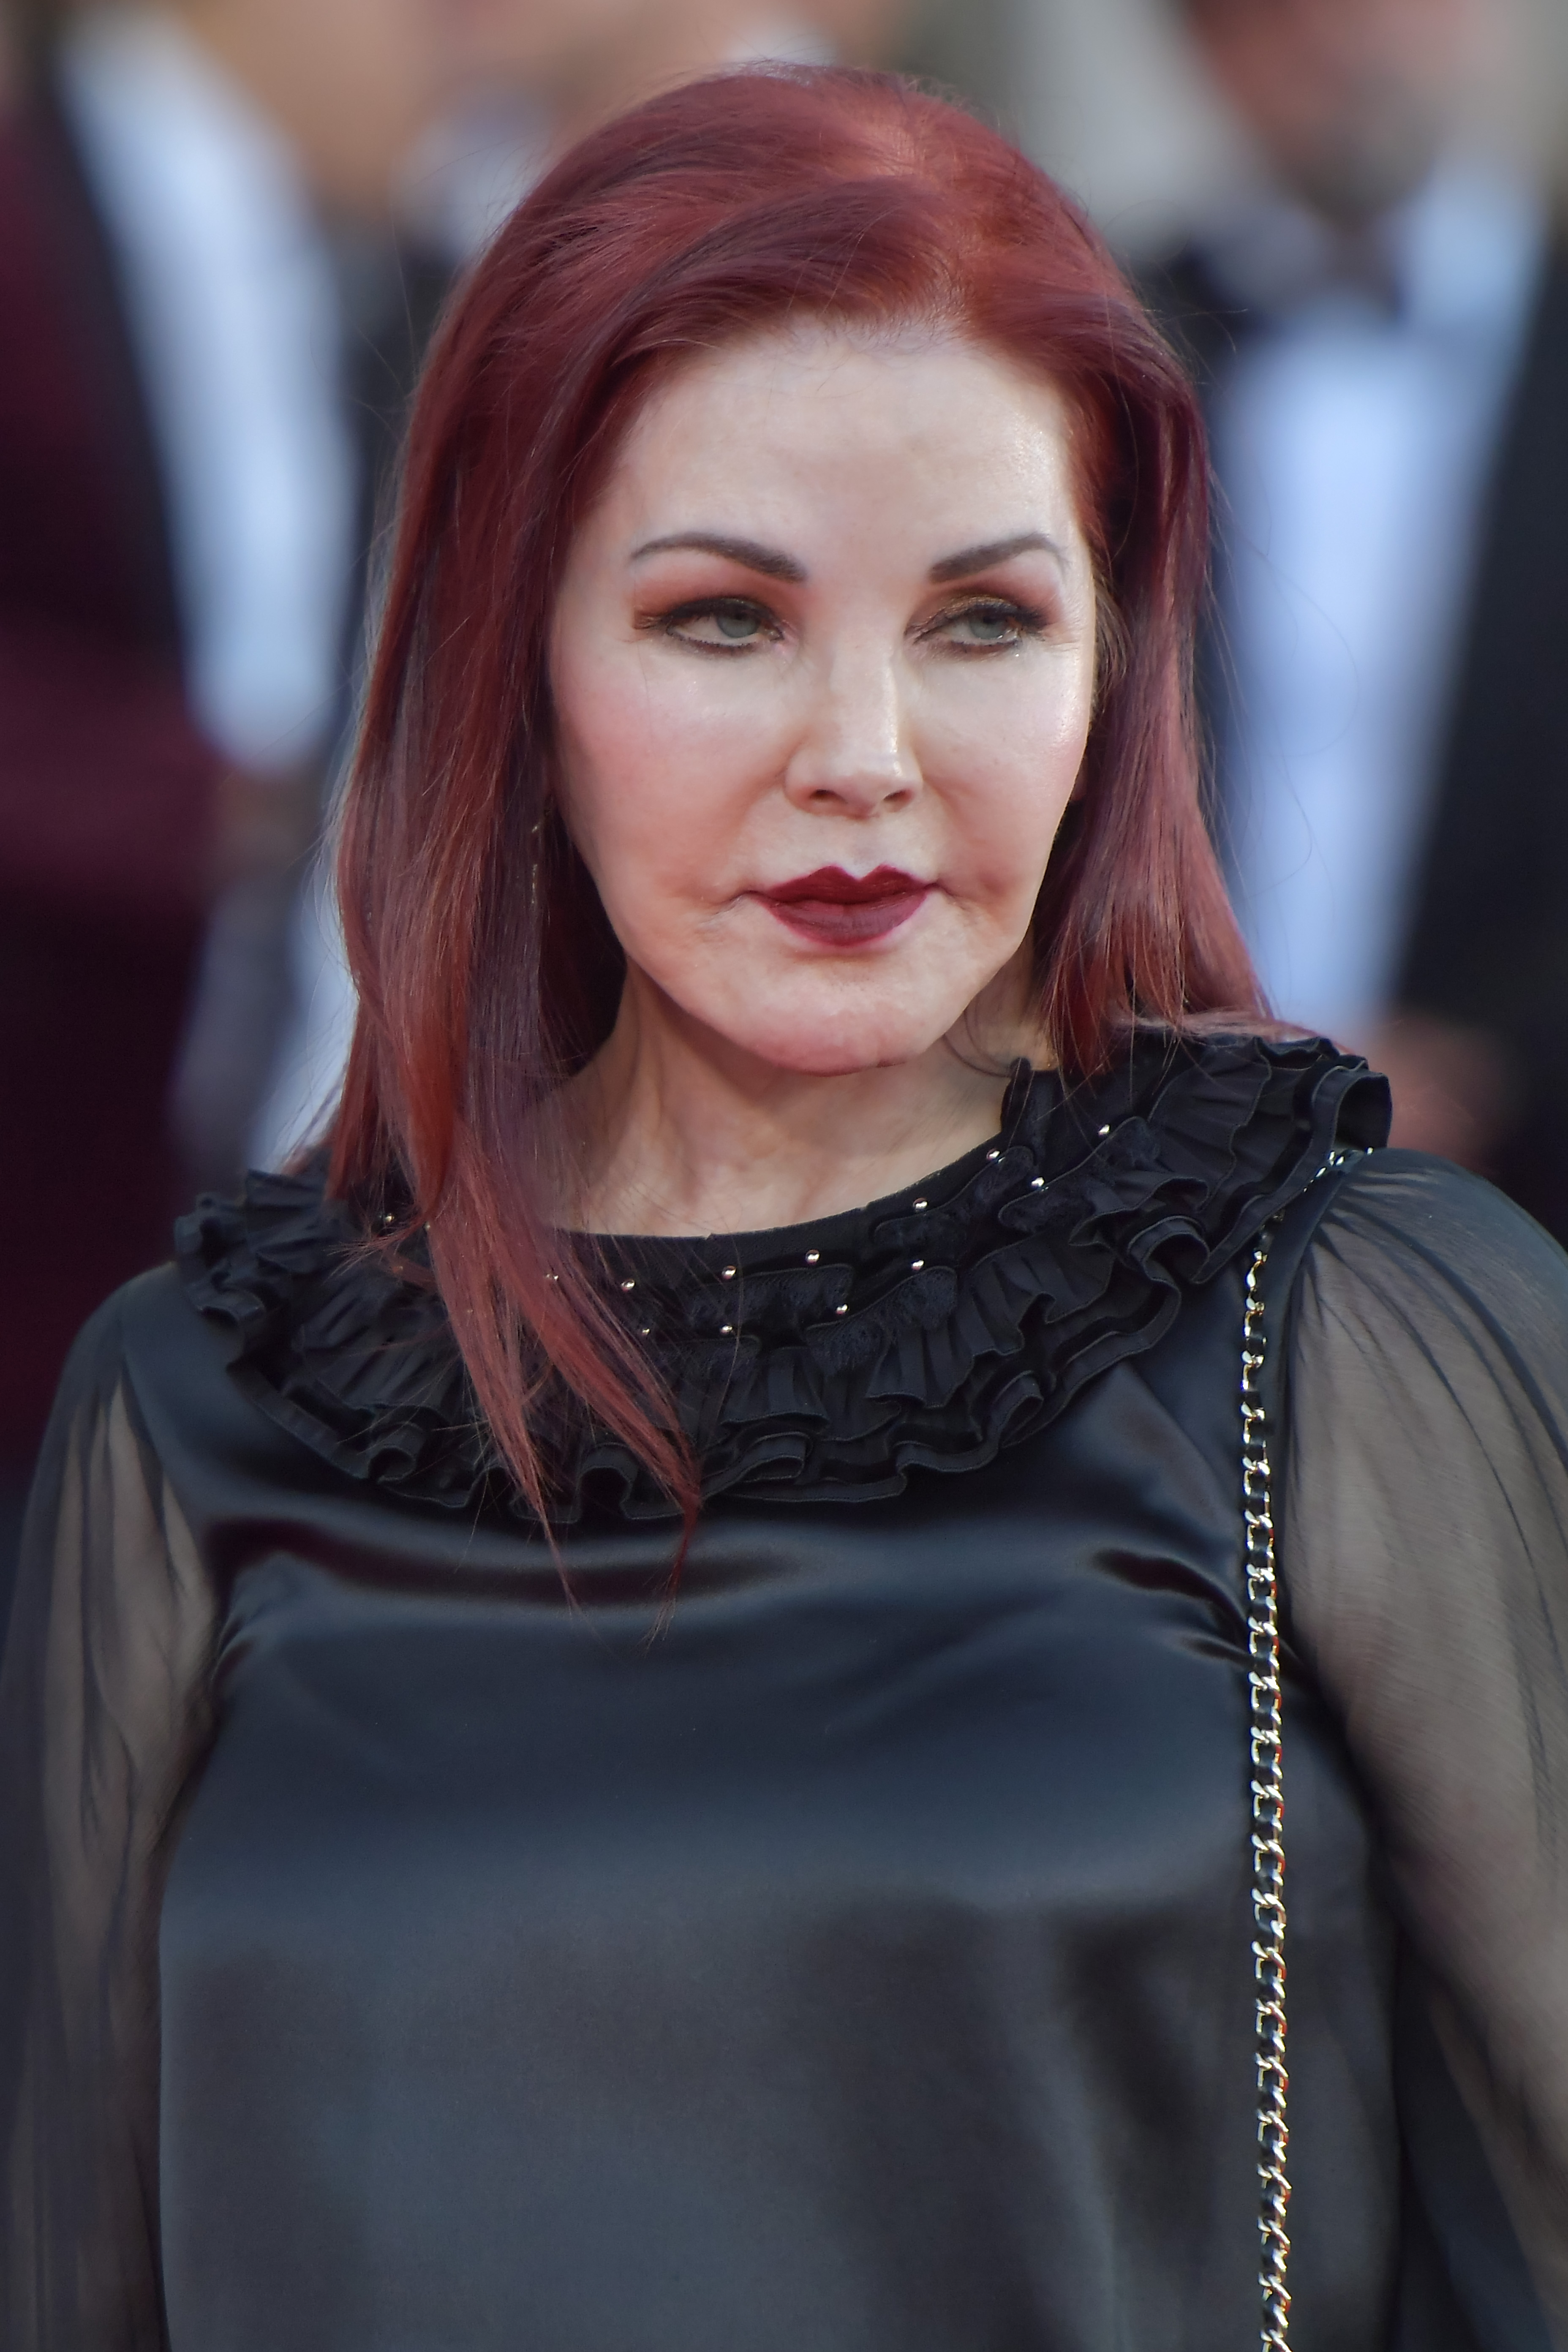 Priscilla Presley at a red carpet event for the movie "Priscilla" at the 80th Venice International Film Festival on September 4, 2023 in Venice, Italy. | Source: Getty Images